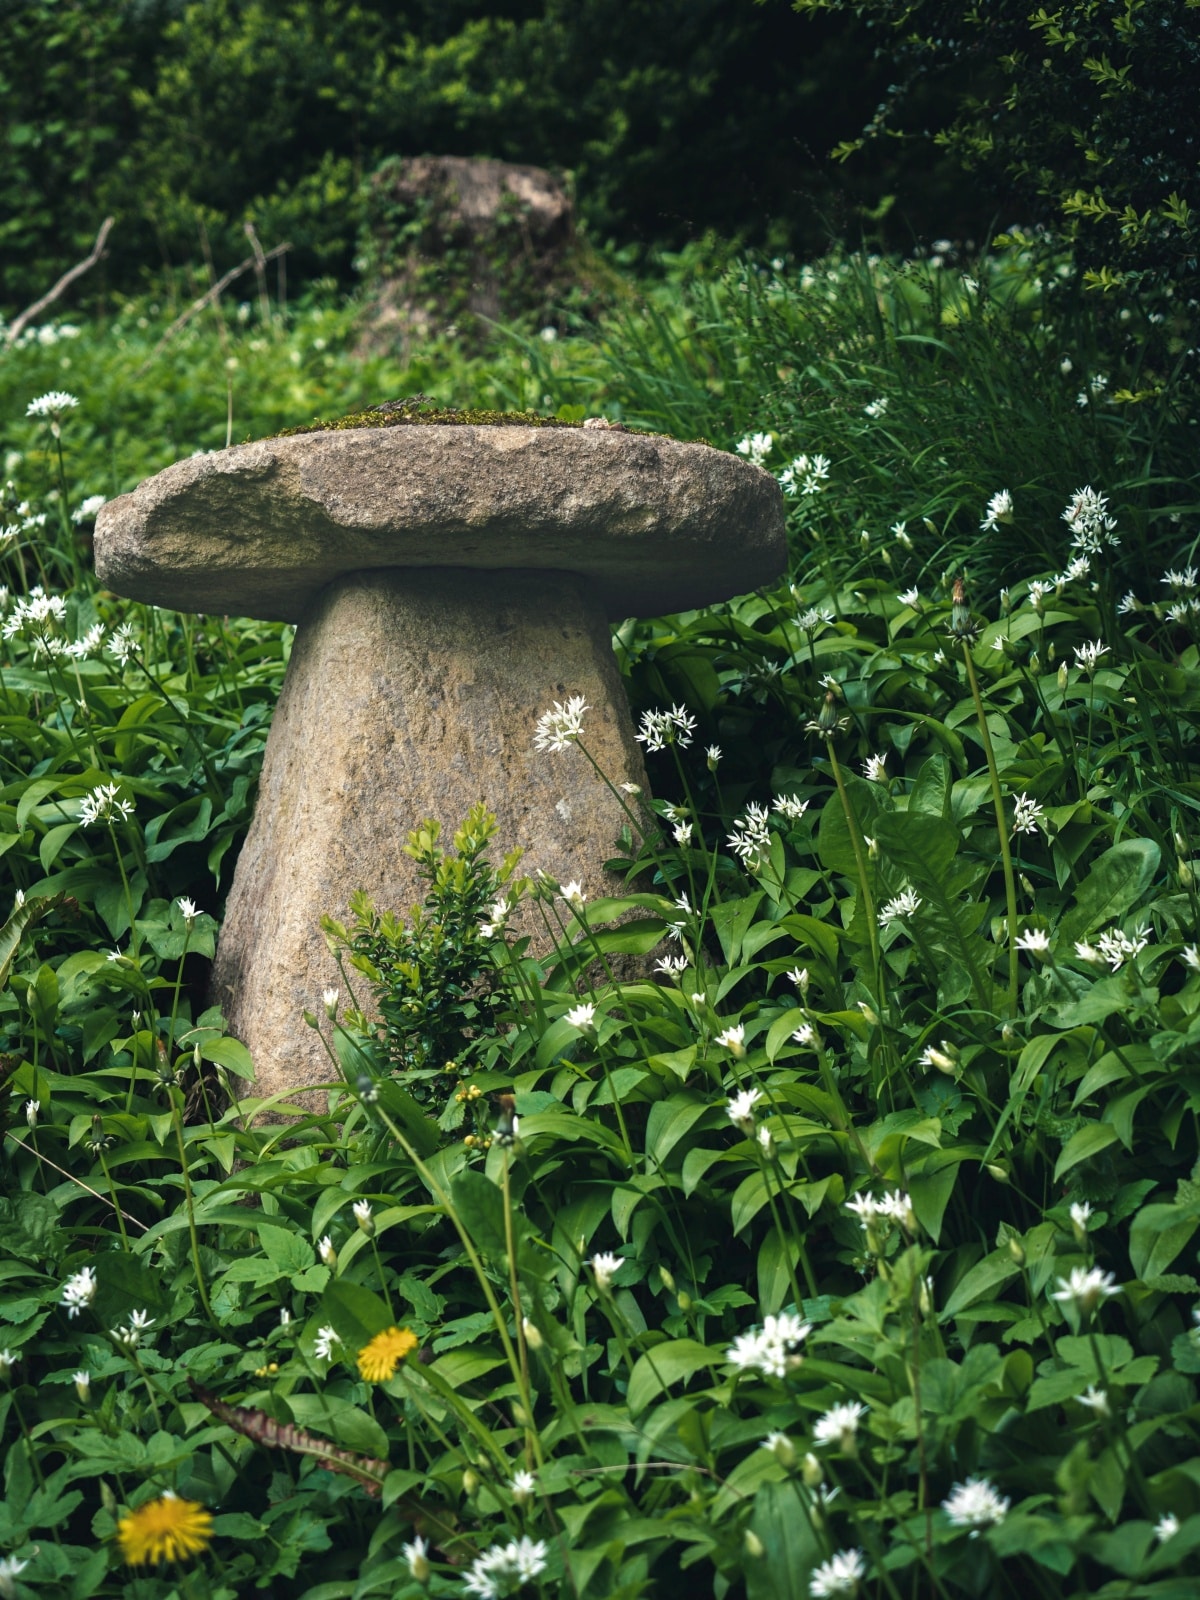 Staddle stone surrounded by wildflowers